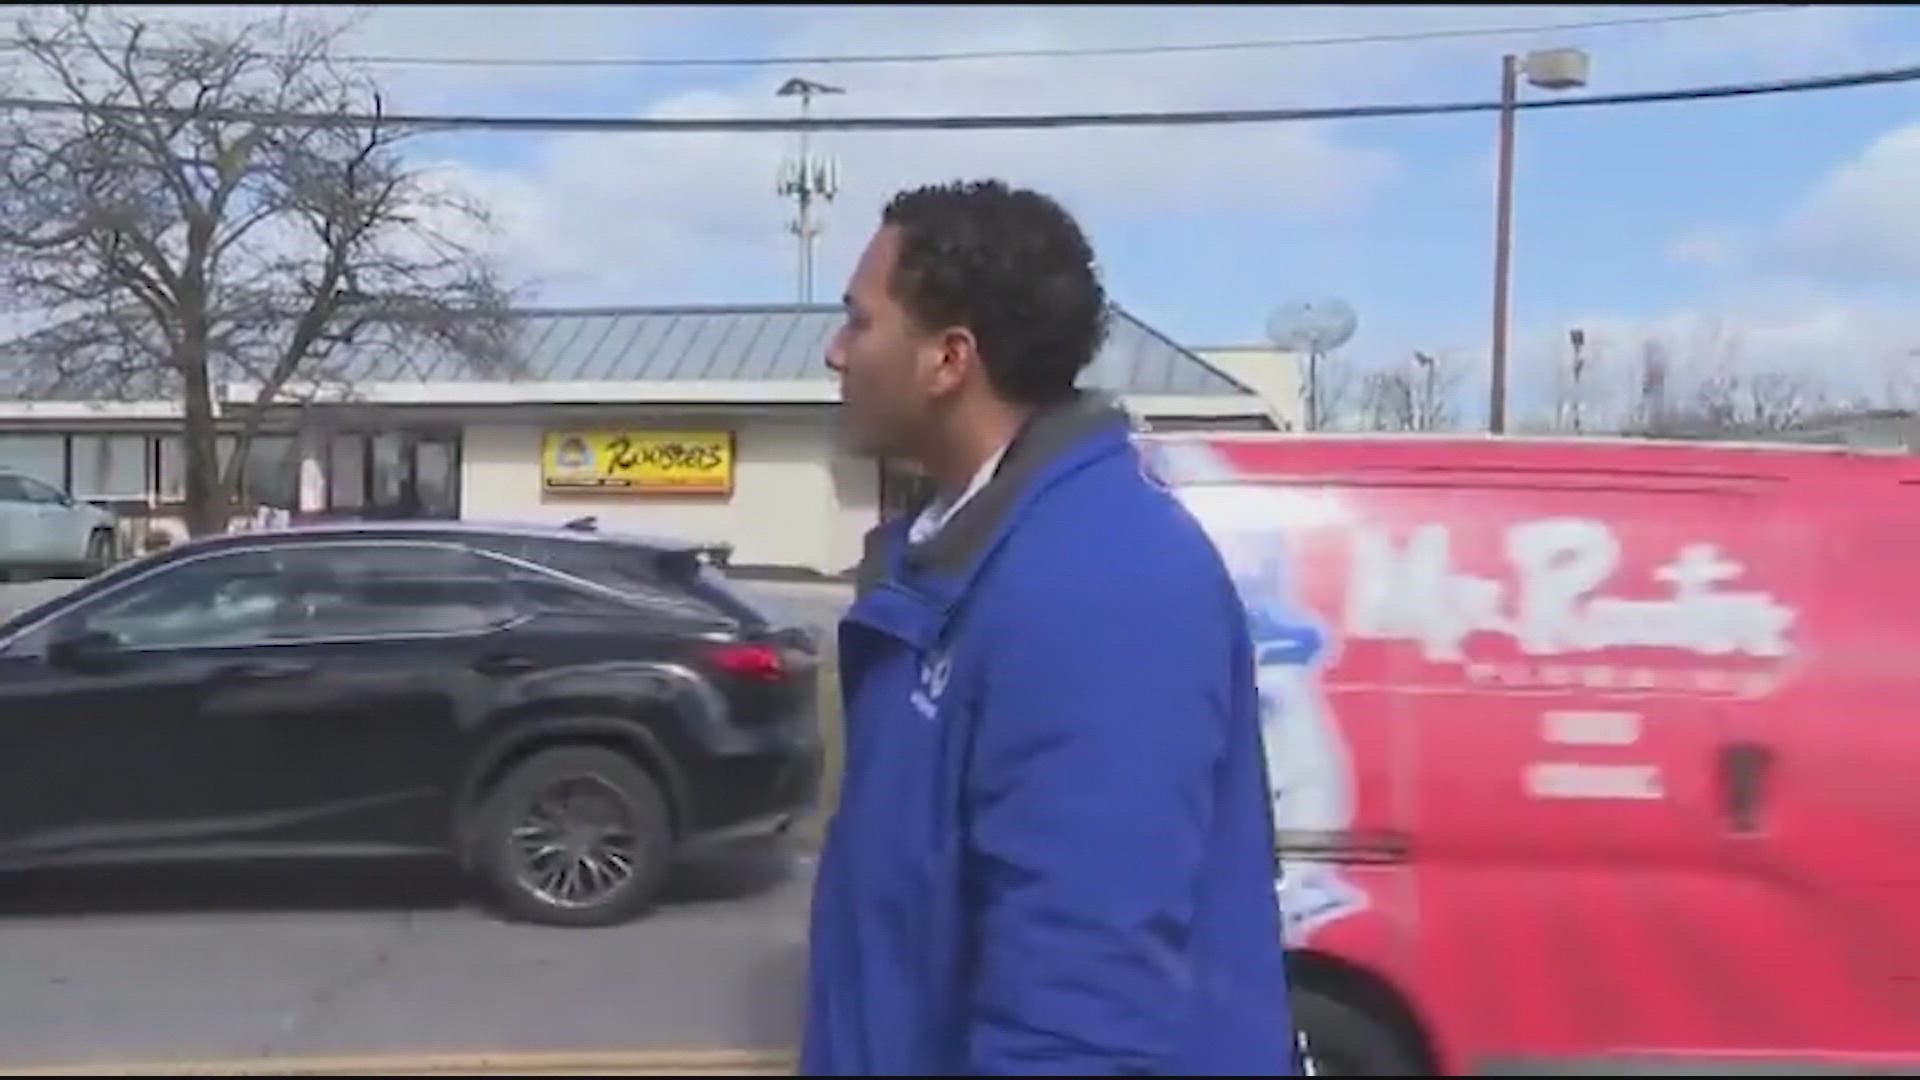 Miles Harris was getting ready for a live shot when his mom Sandi pulled up in a car behind him and yelled, "Hi, baby!"